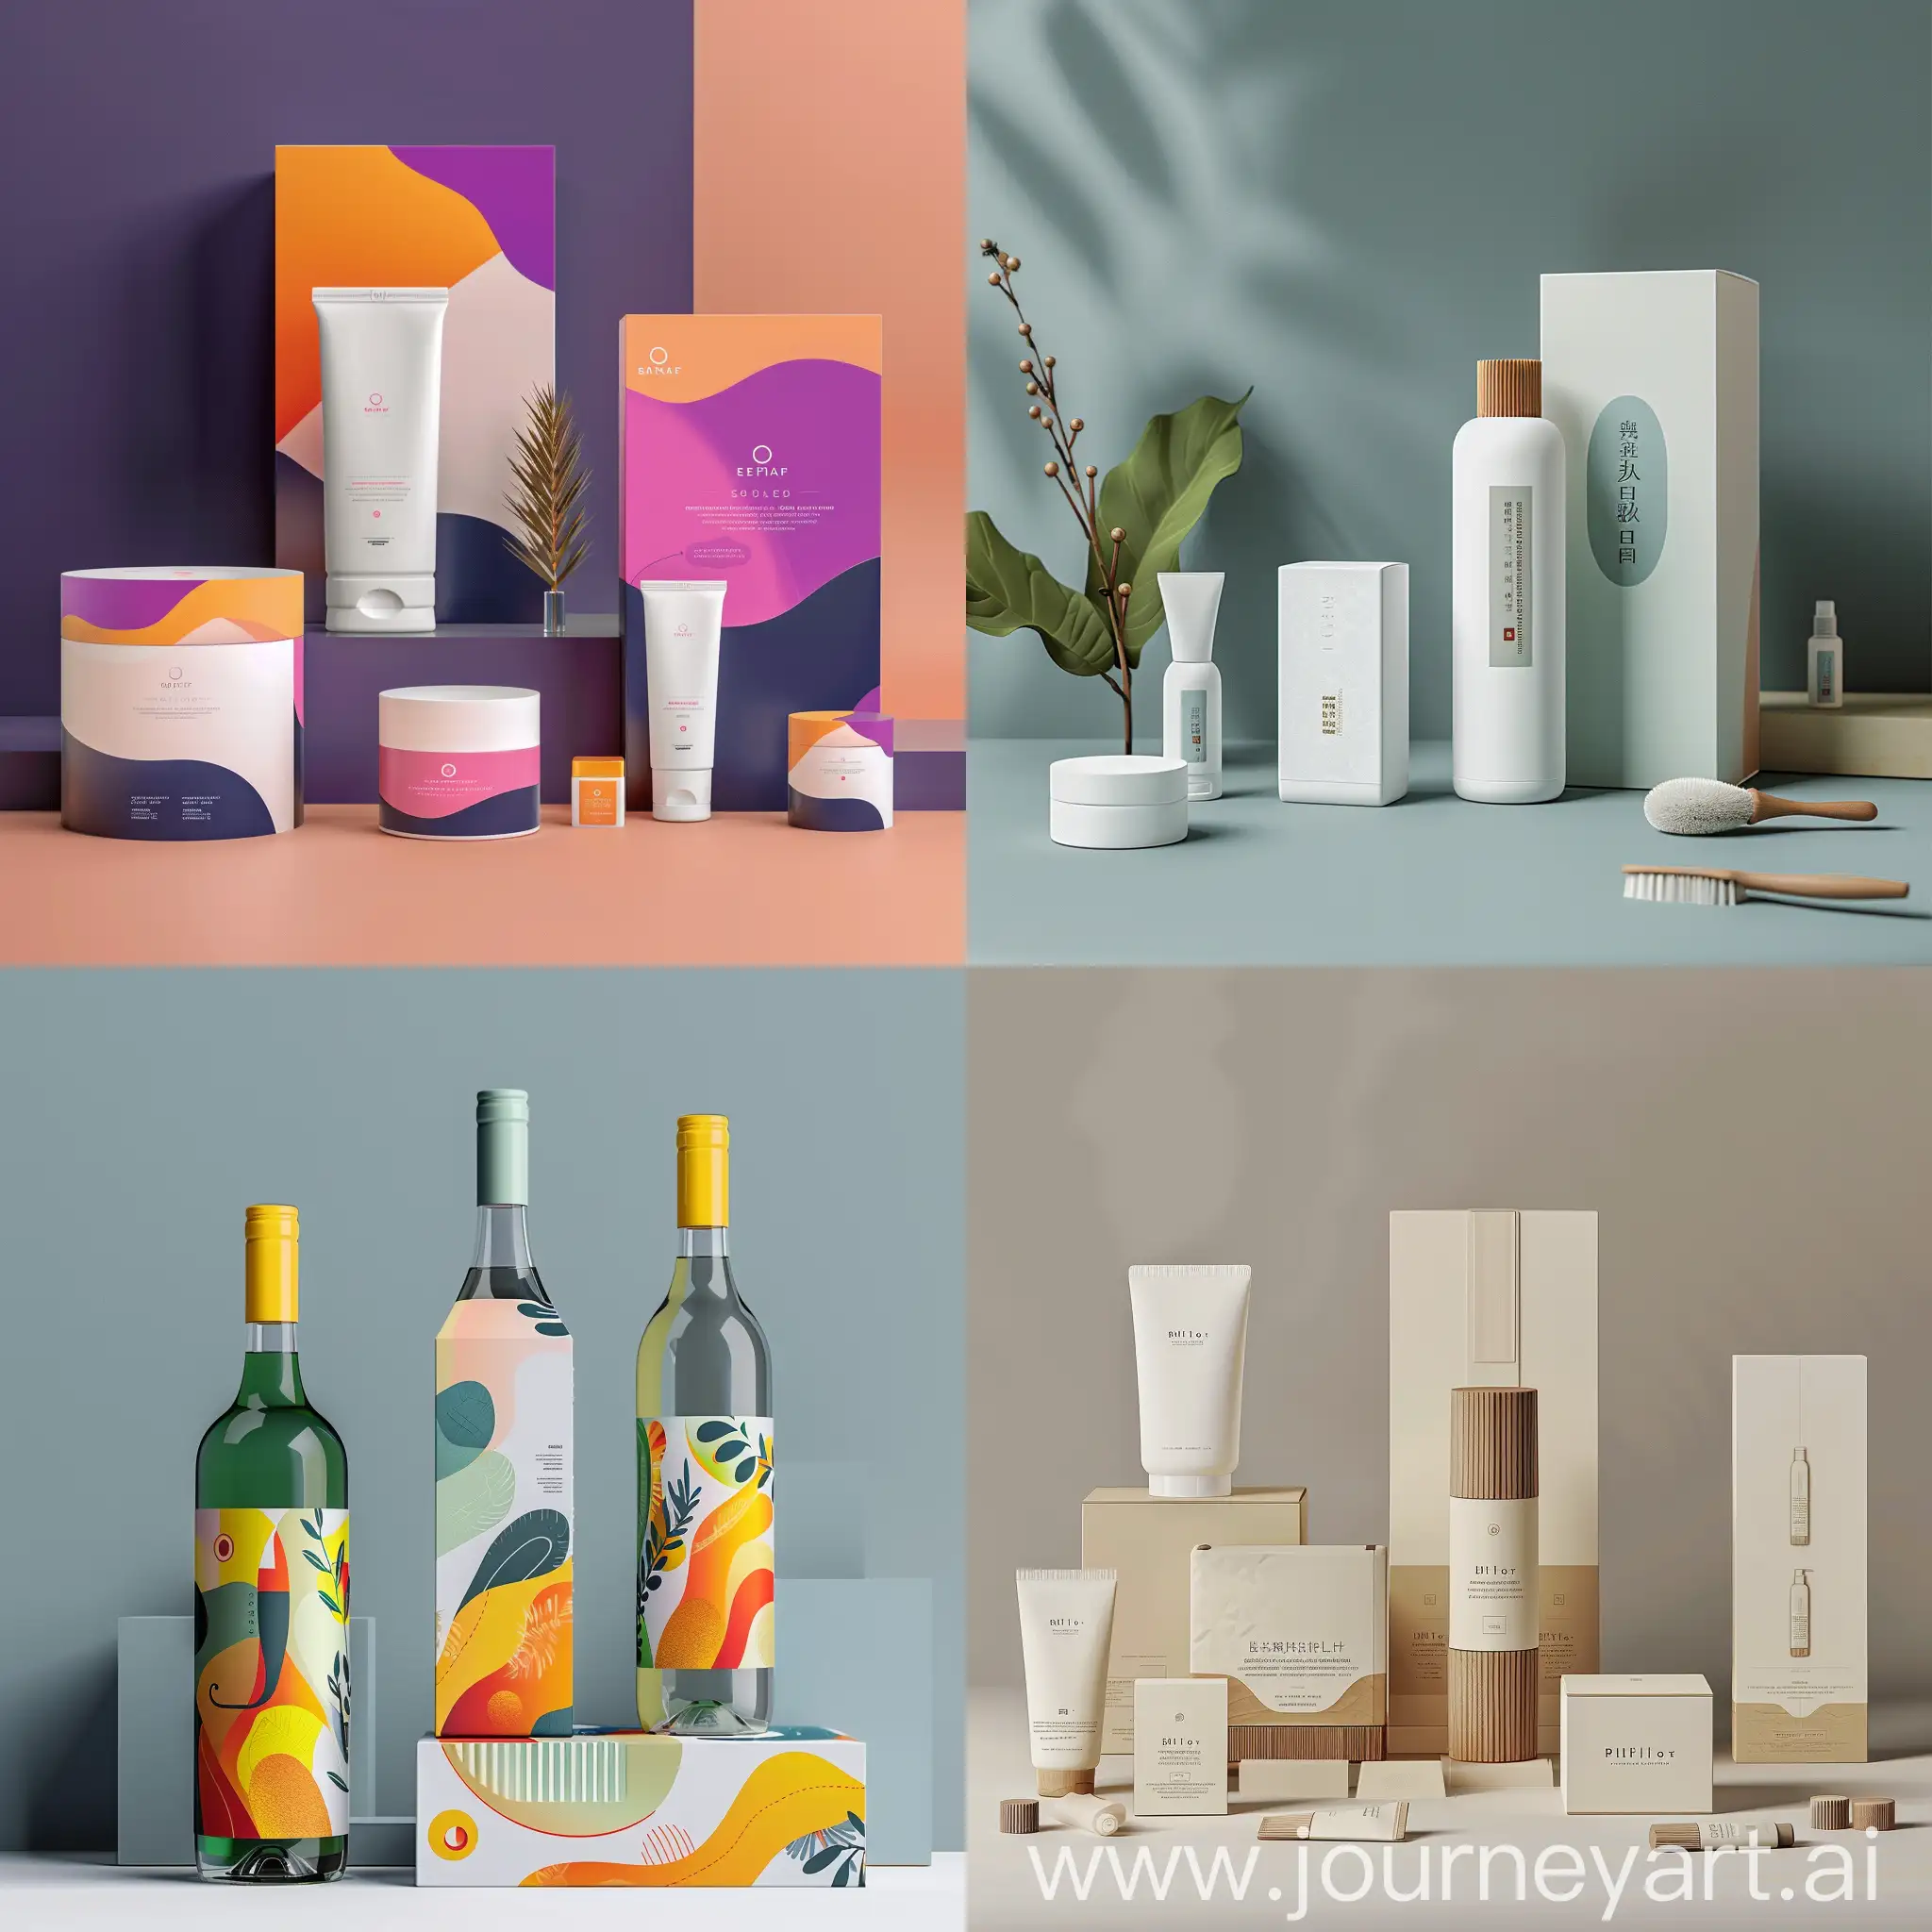 Professional-Product-Packaging-Design-with-Abstract-Geometric-Patterns